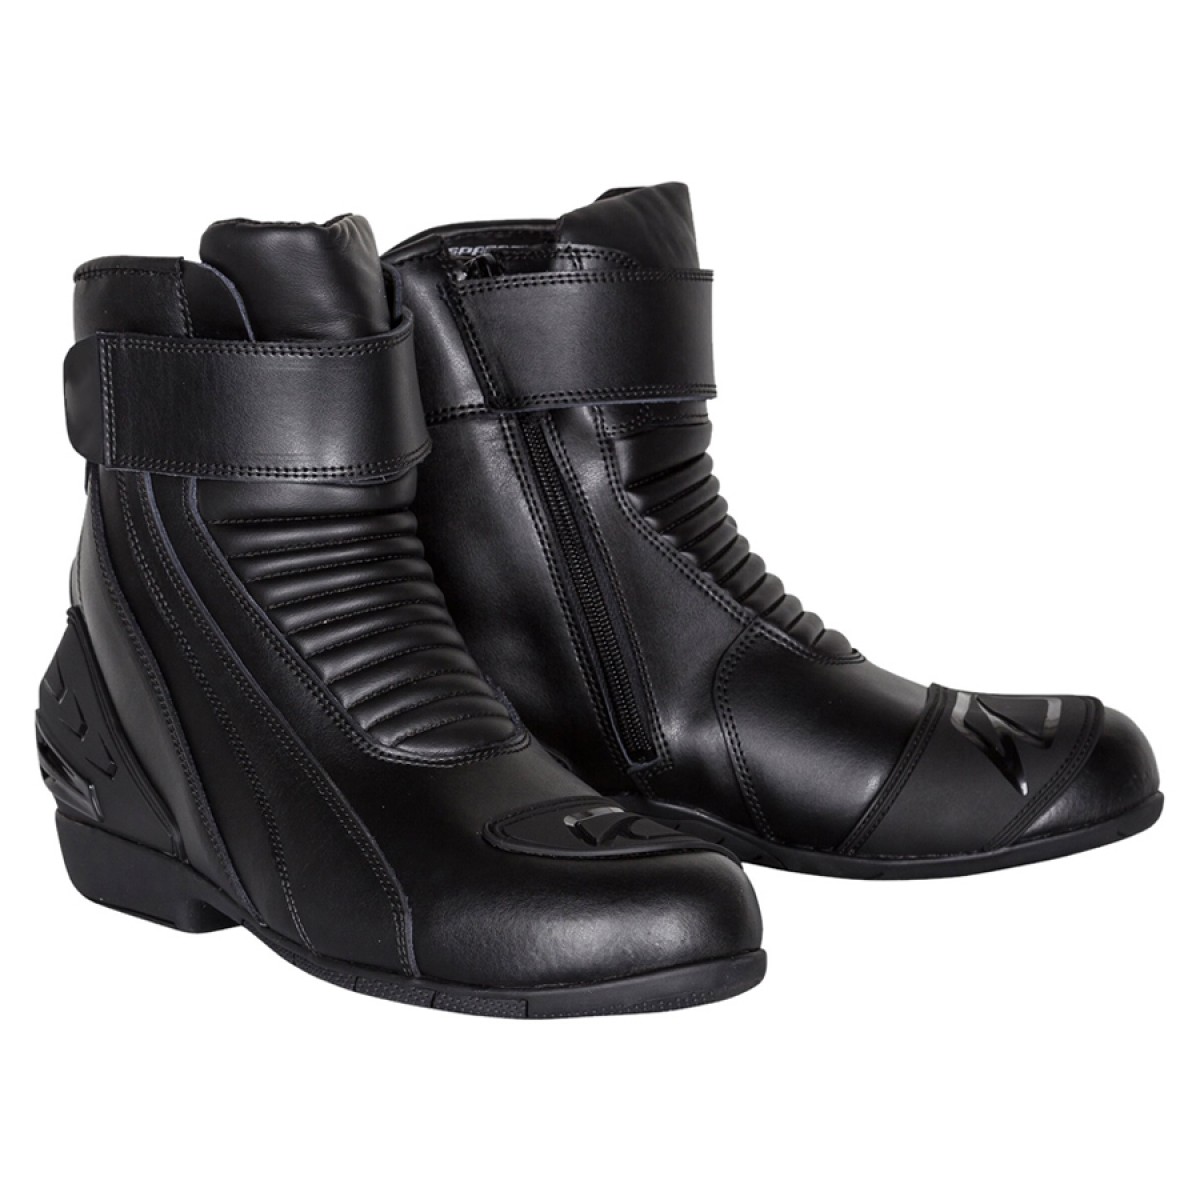 Leather Boots For Men Fashion - Ionia Sports